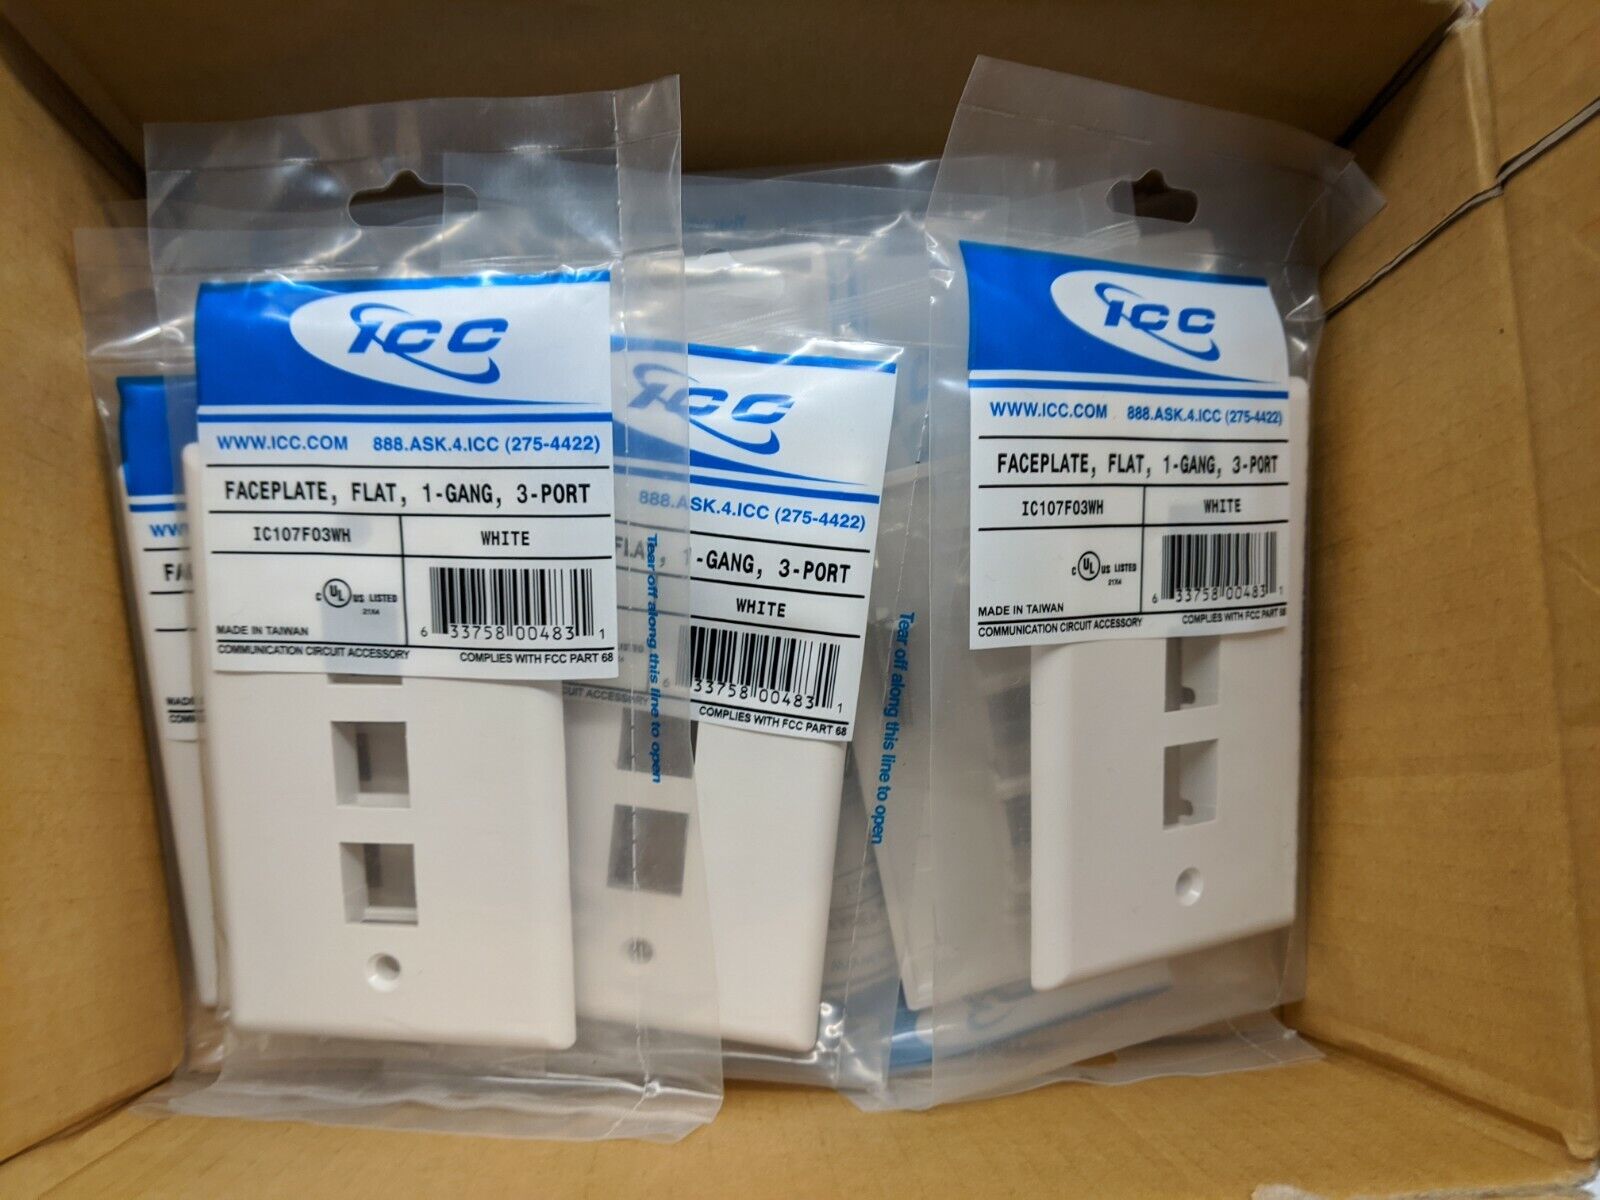 ICC IC107F03WH, Faceplate, Flat, 1-Gang, 3-Port, White 